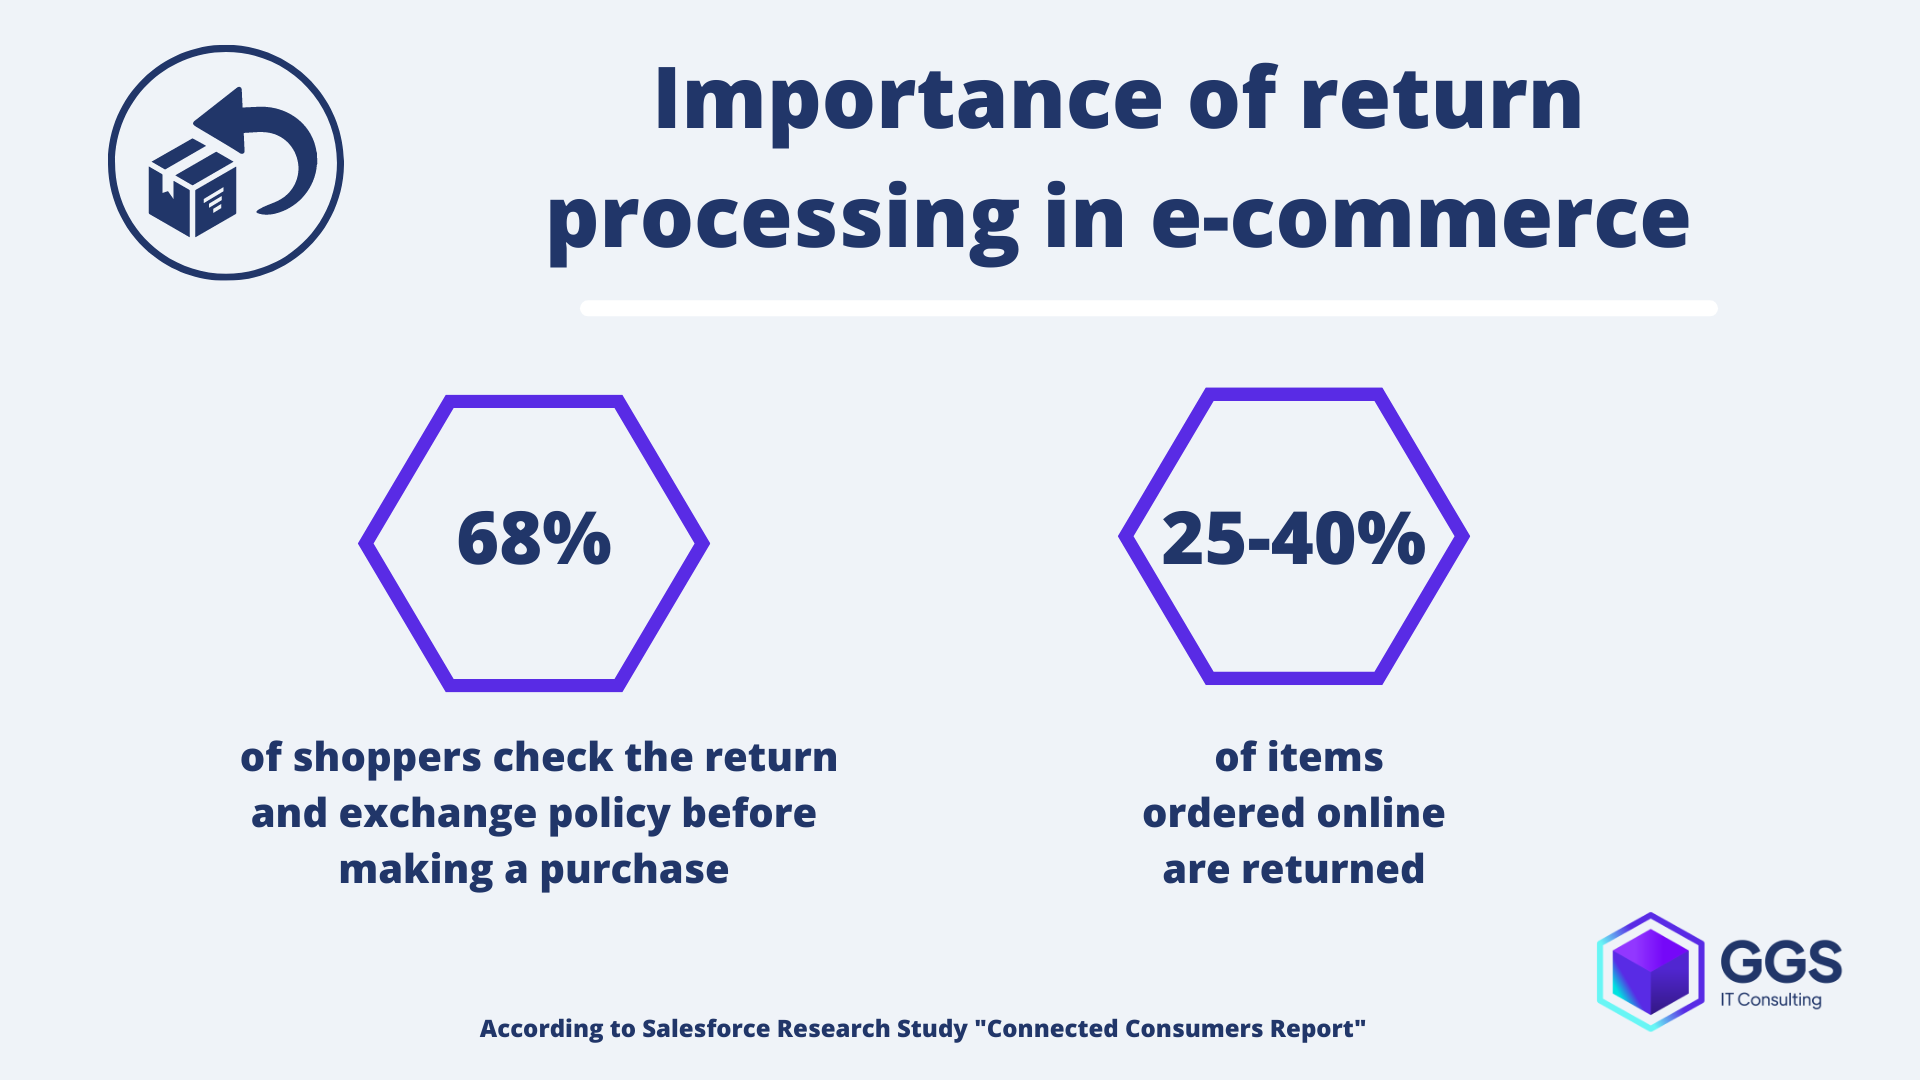 Importance of return processing in e-commerce example